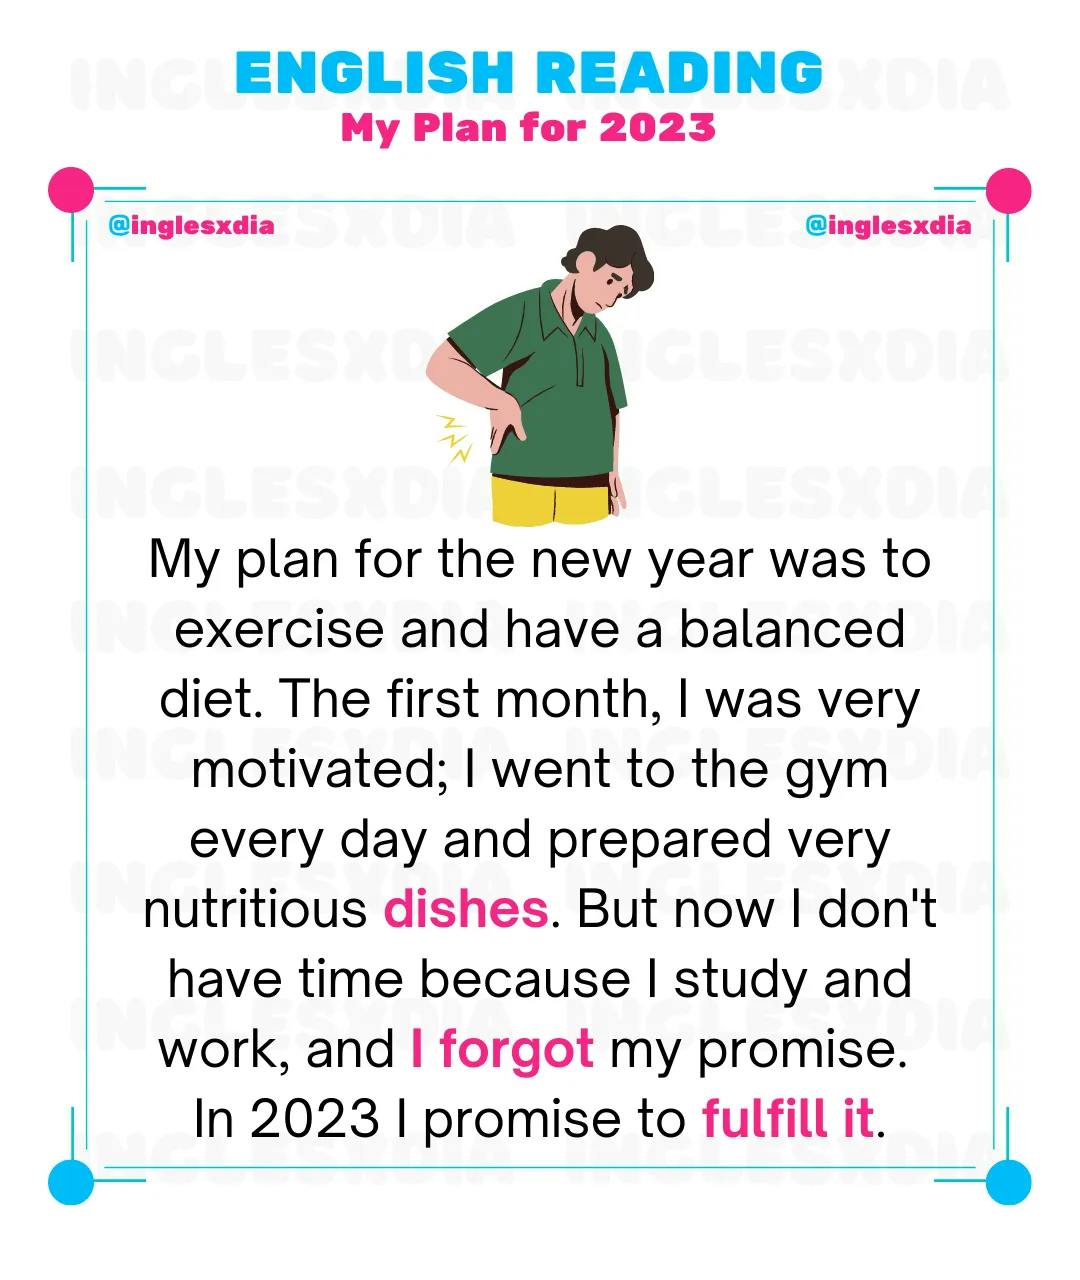 My Plan for 2023